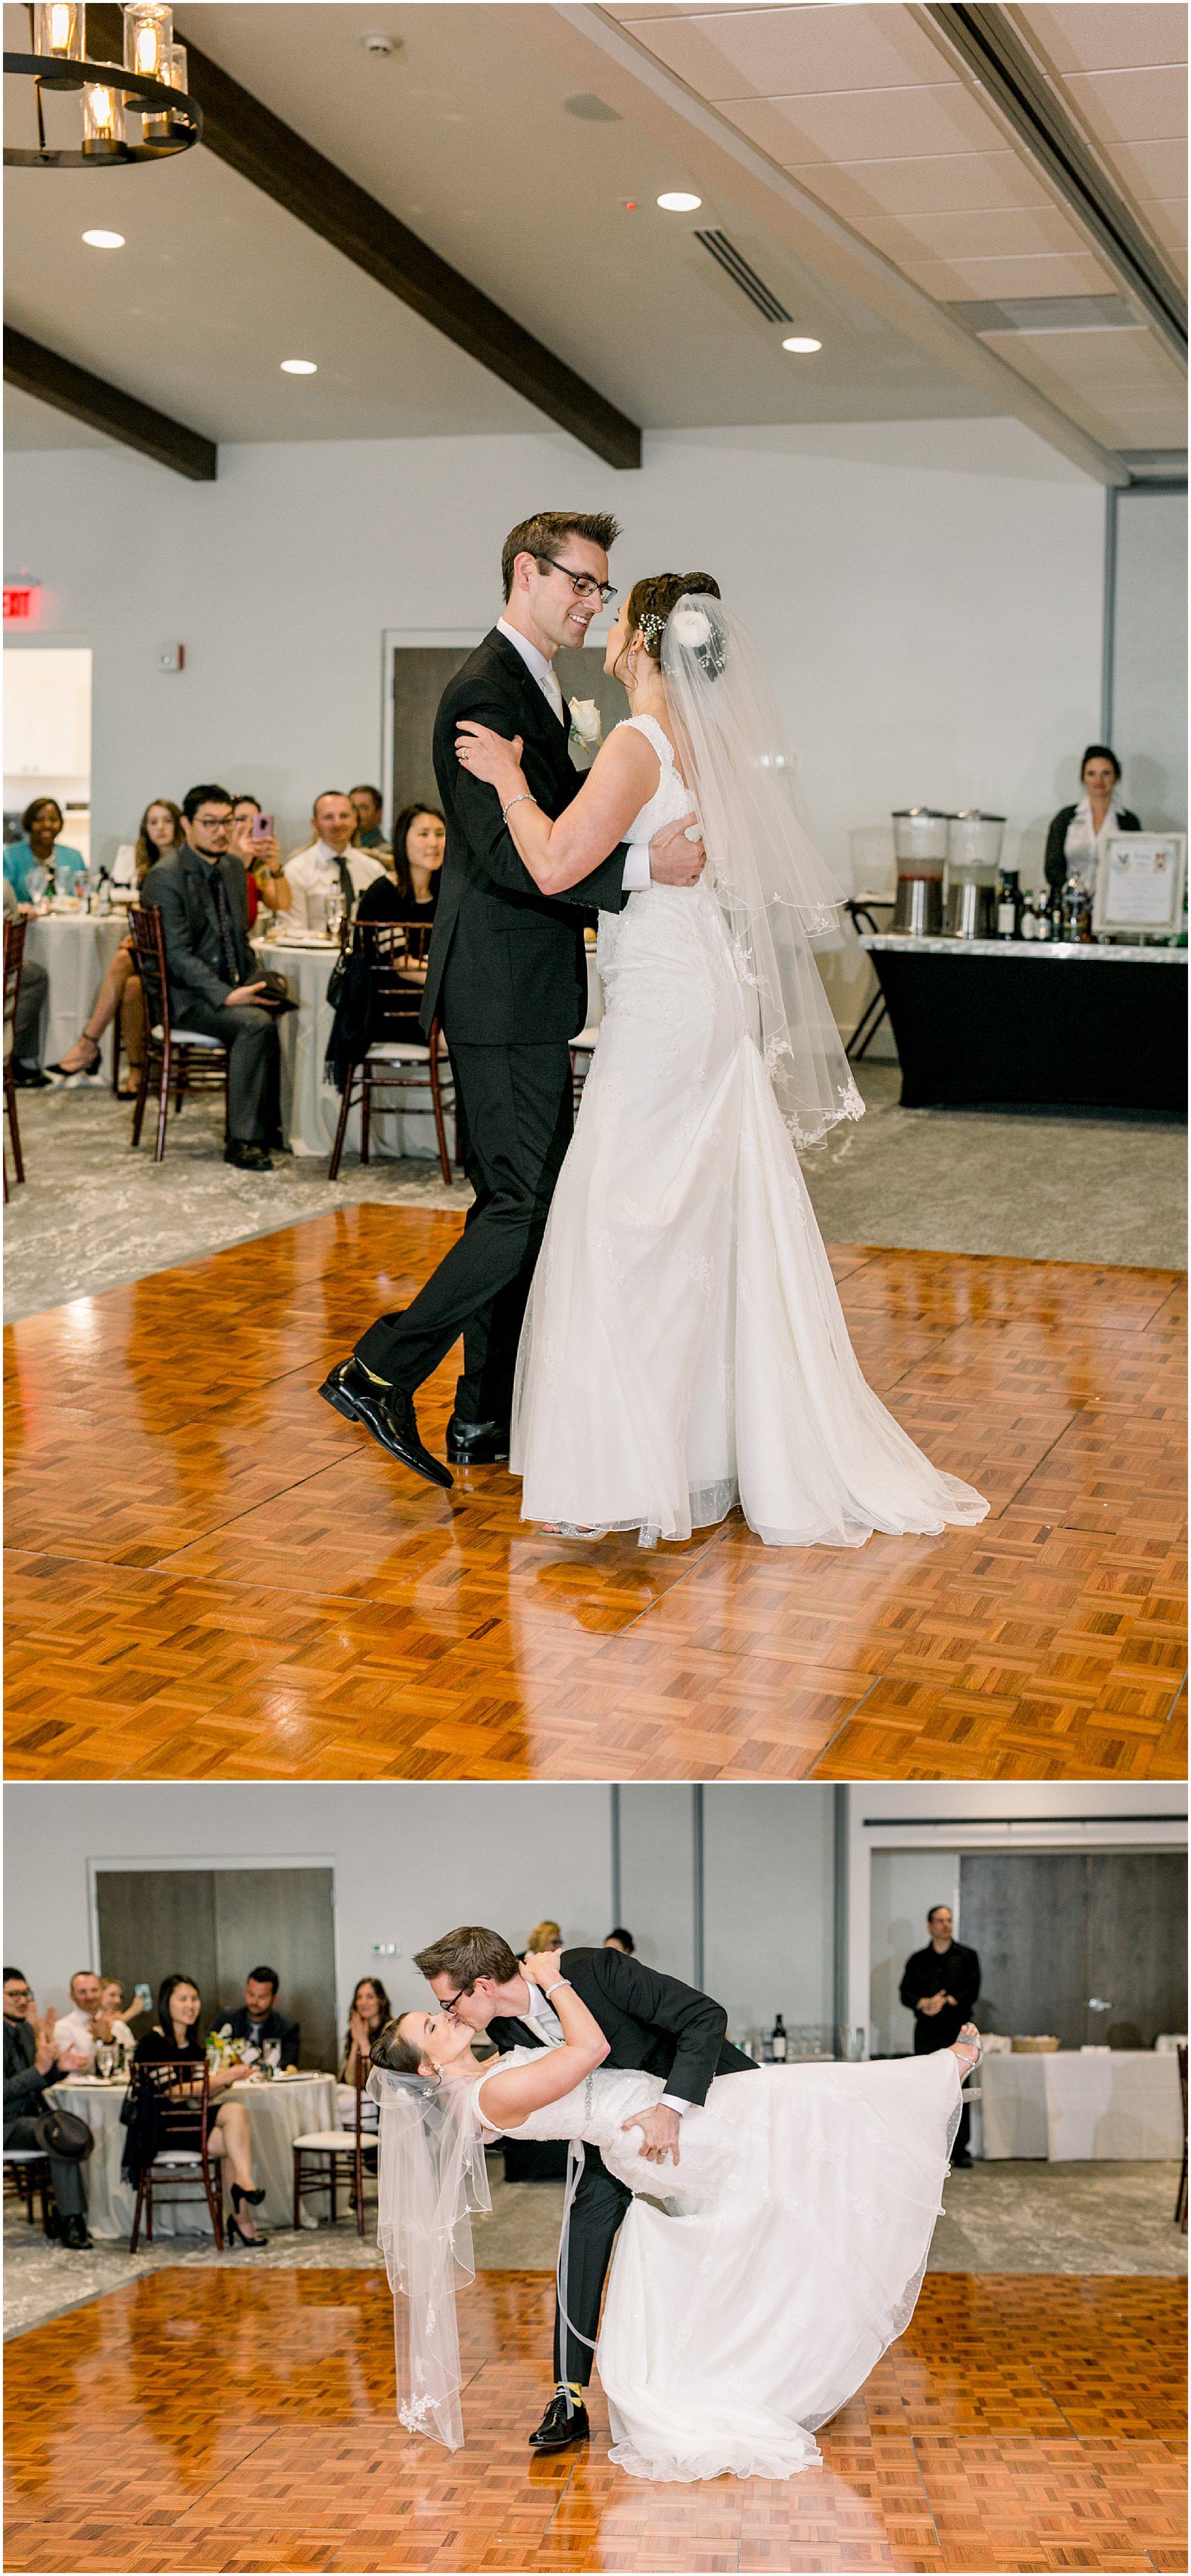 Bride and groom at their first dance.